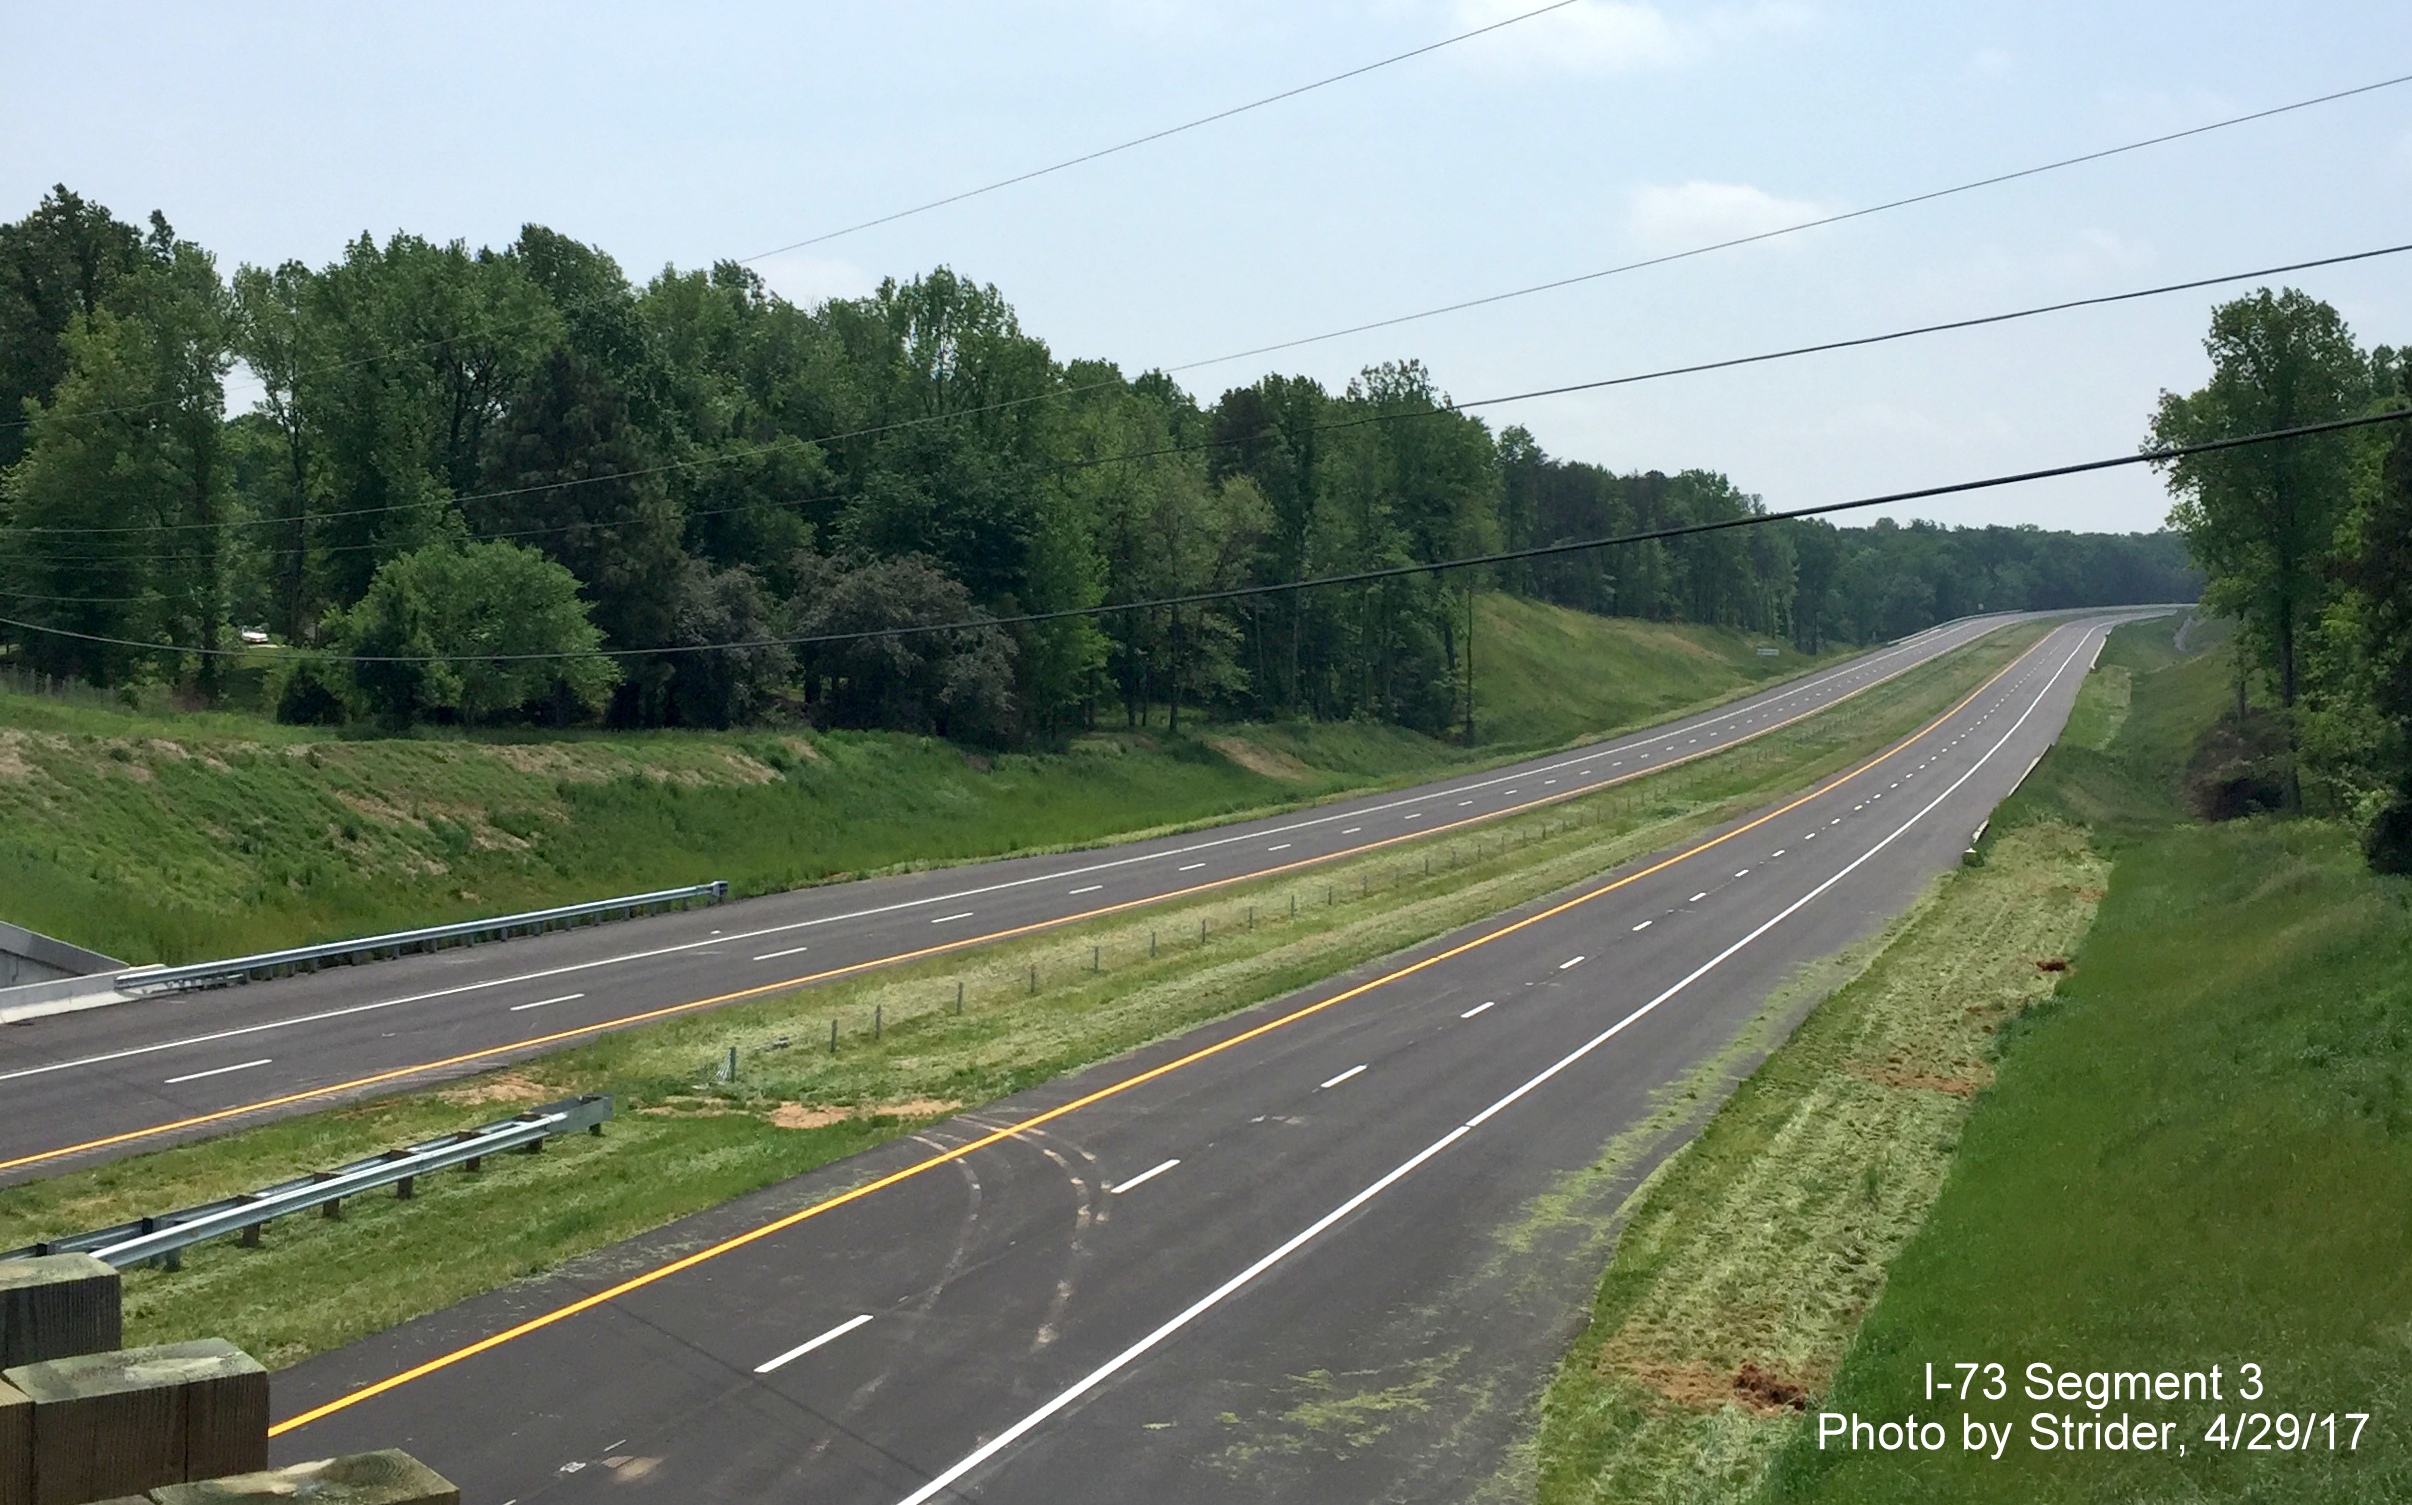 Image taken of view south of Alcorn Rd bridge of nearly completed Future I-73 roadway, by Strider